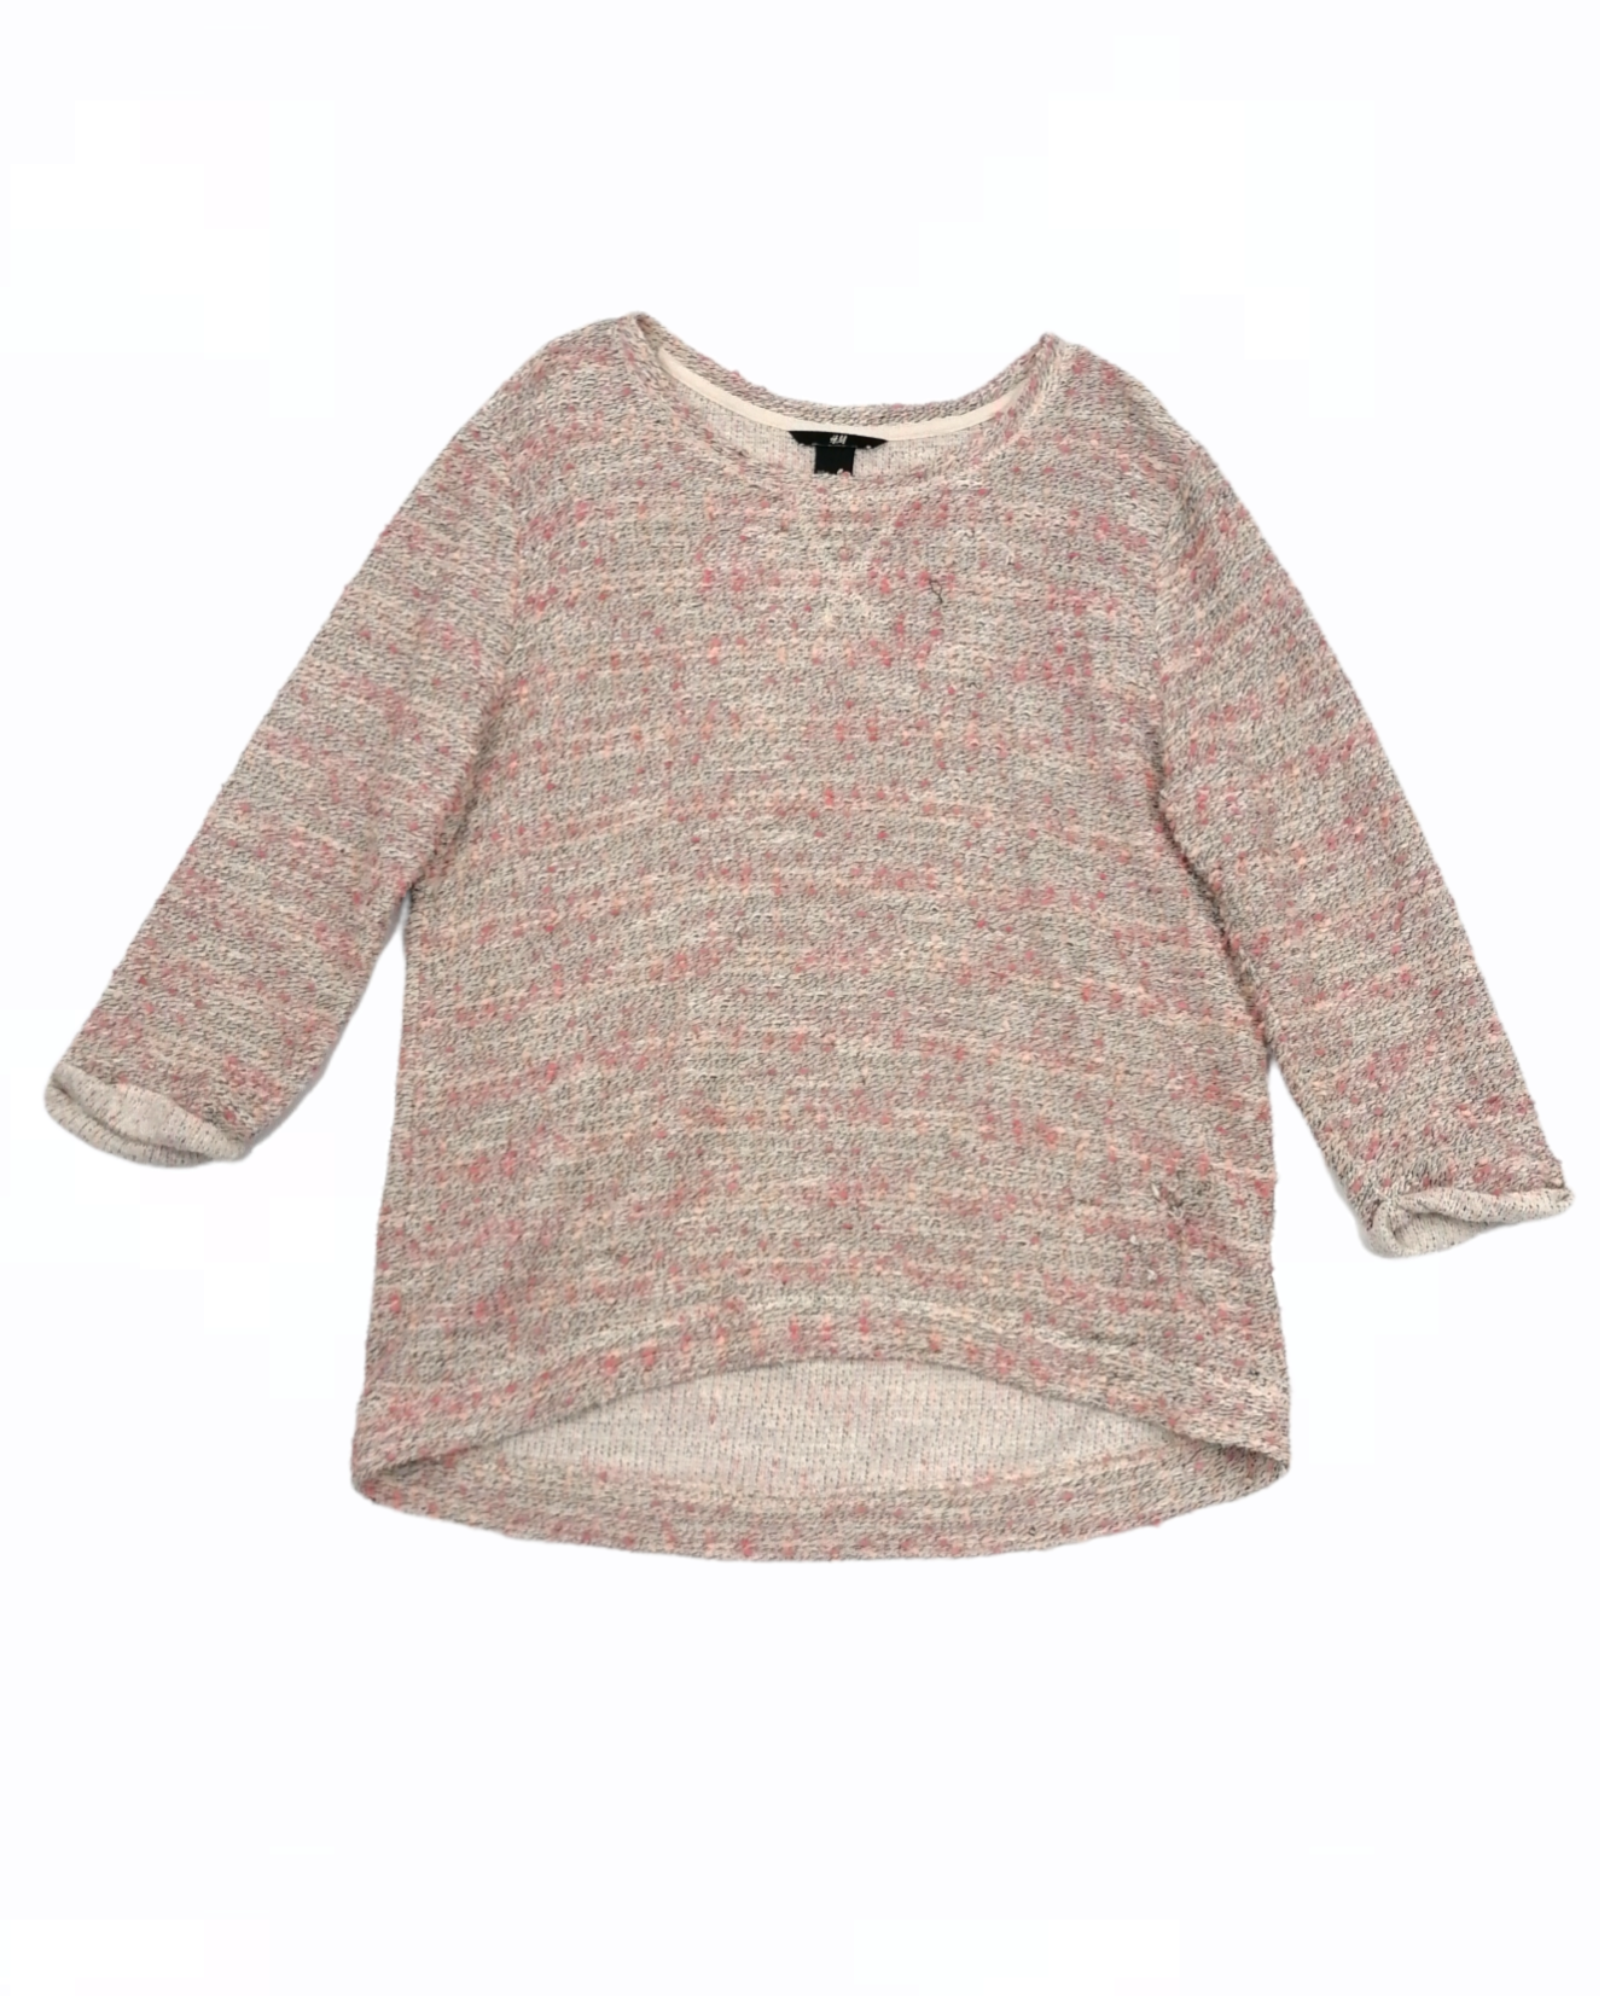 Pullovers Pullovers H&M 1